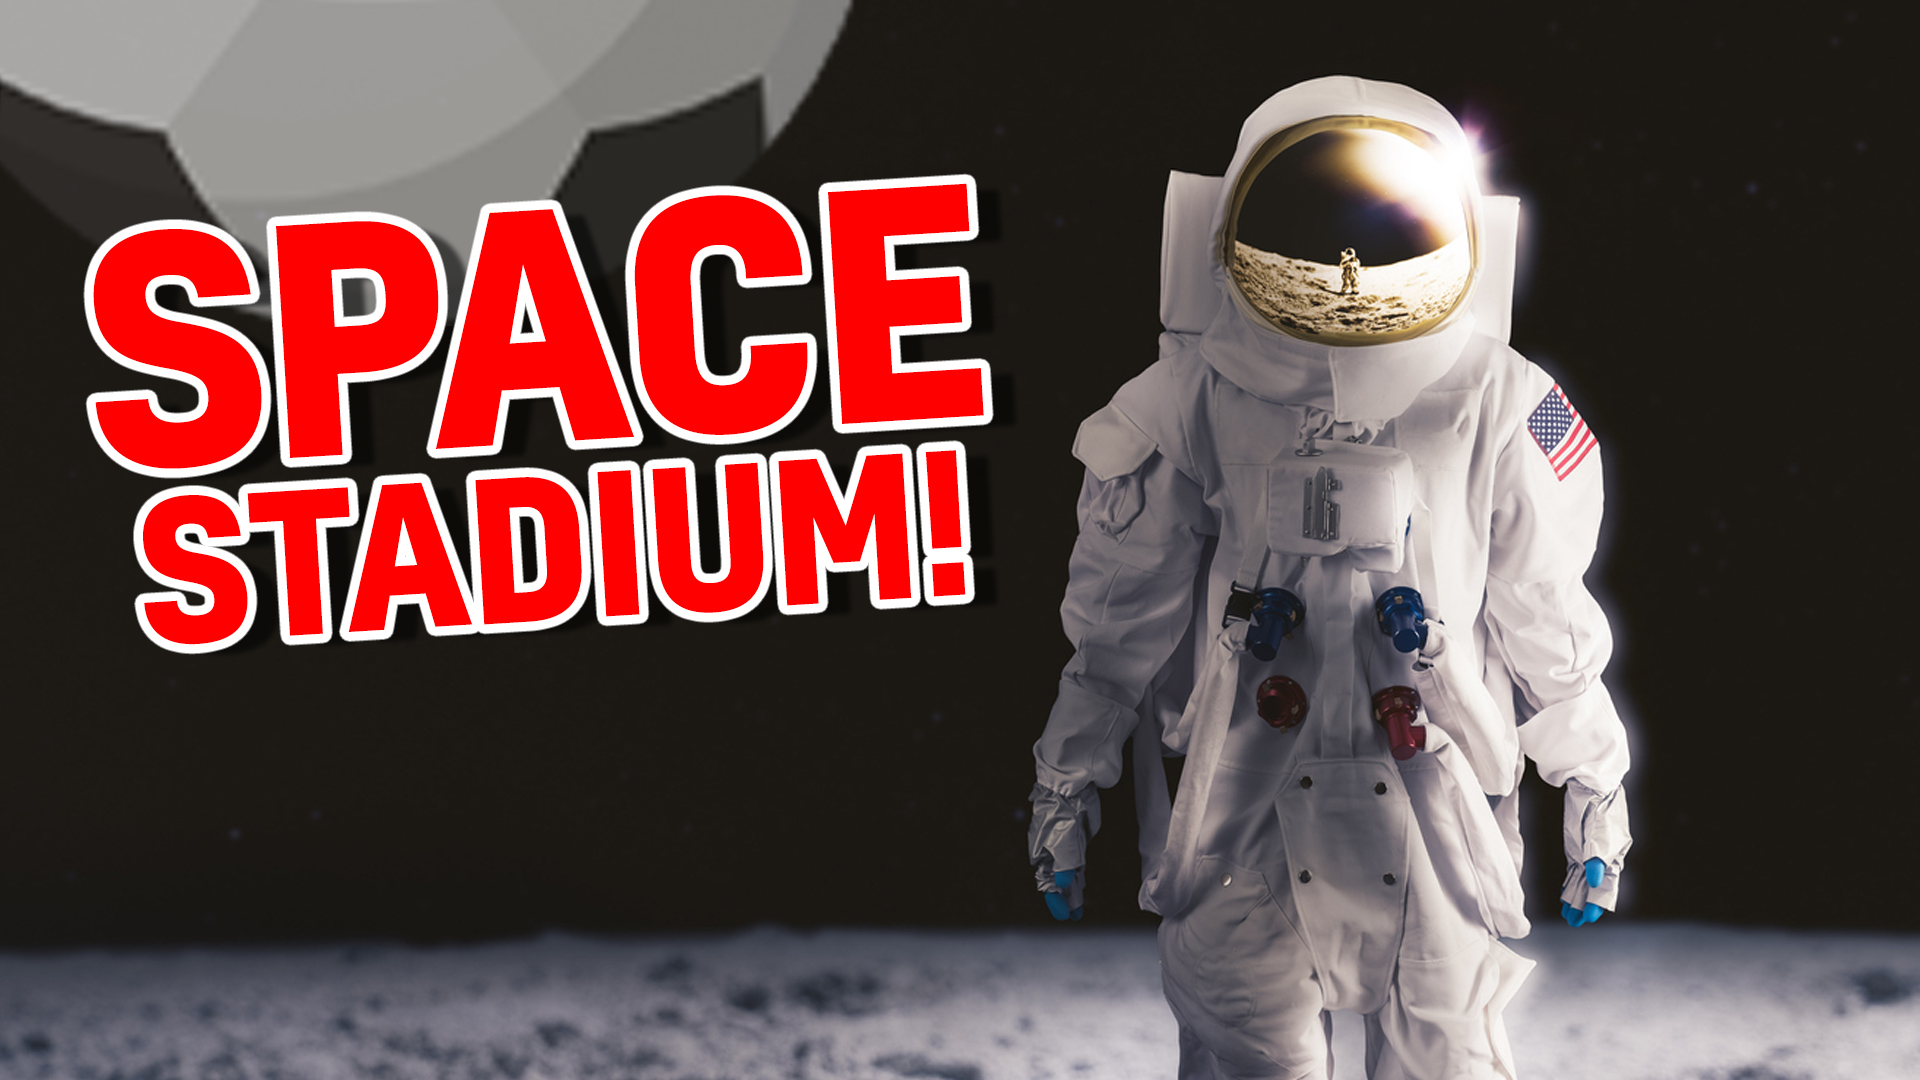 Your team will play in a: SPACE STADIUM!